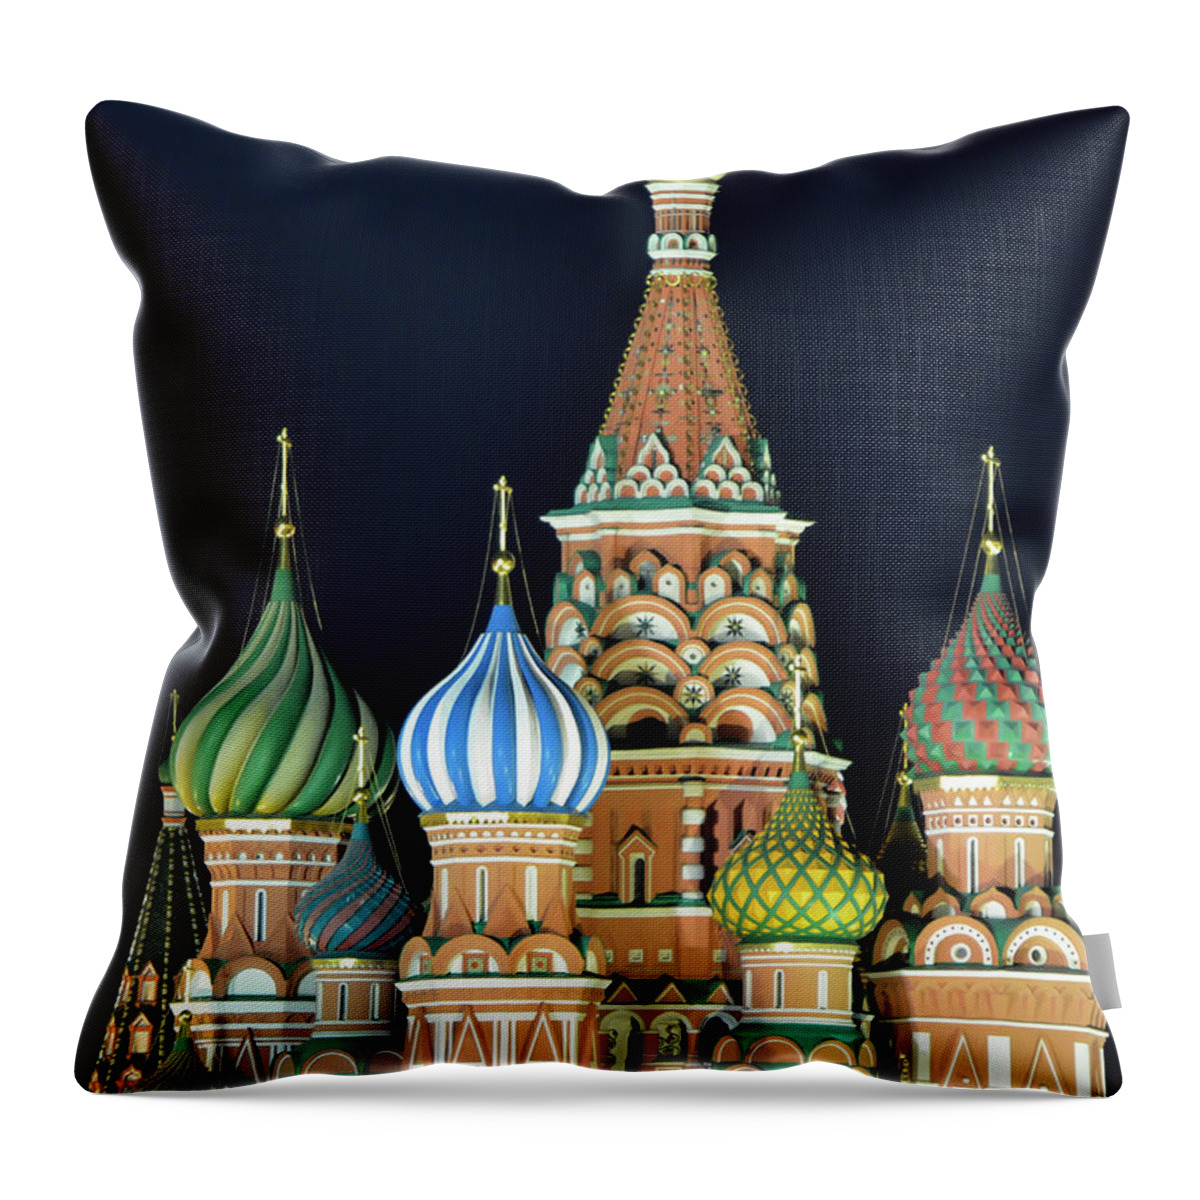 Tranquility Throw Pillow featuring the photograph Saint Basils Cathedral By Night by Federica Gentile